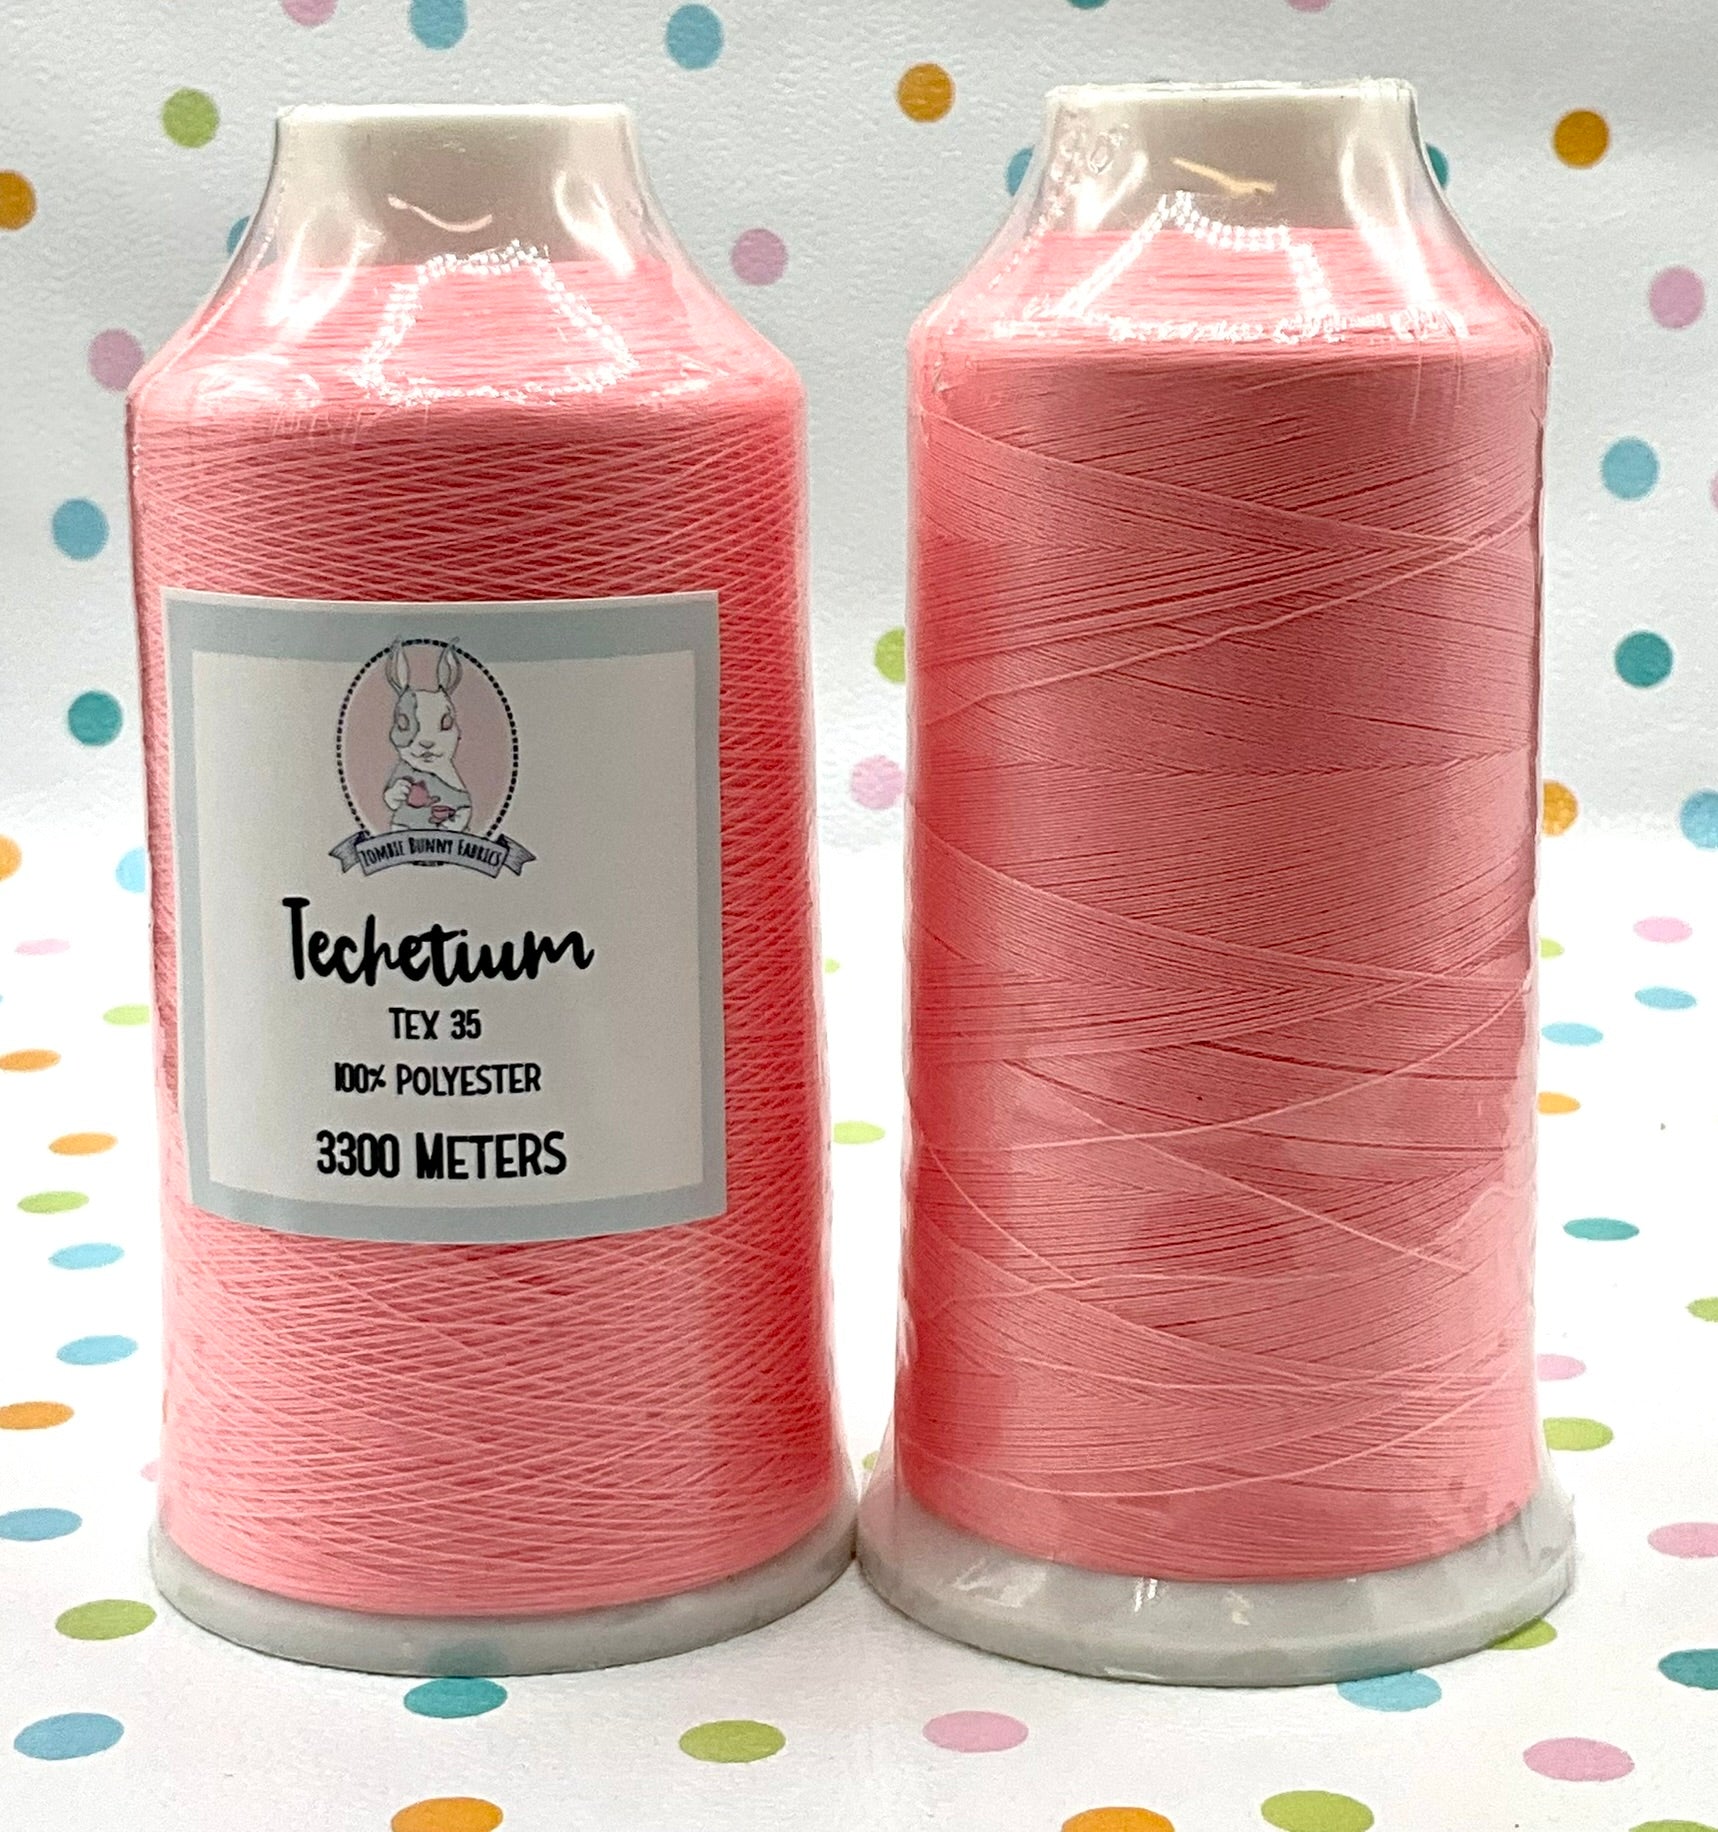 RETAIL THREAD Tex 35 Polyester Sewing Thread (3300 Meters) Glow in the Dark